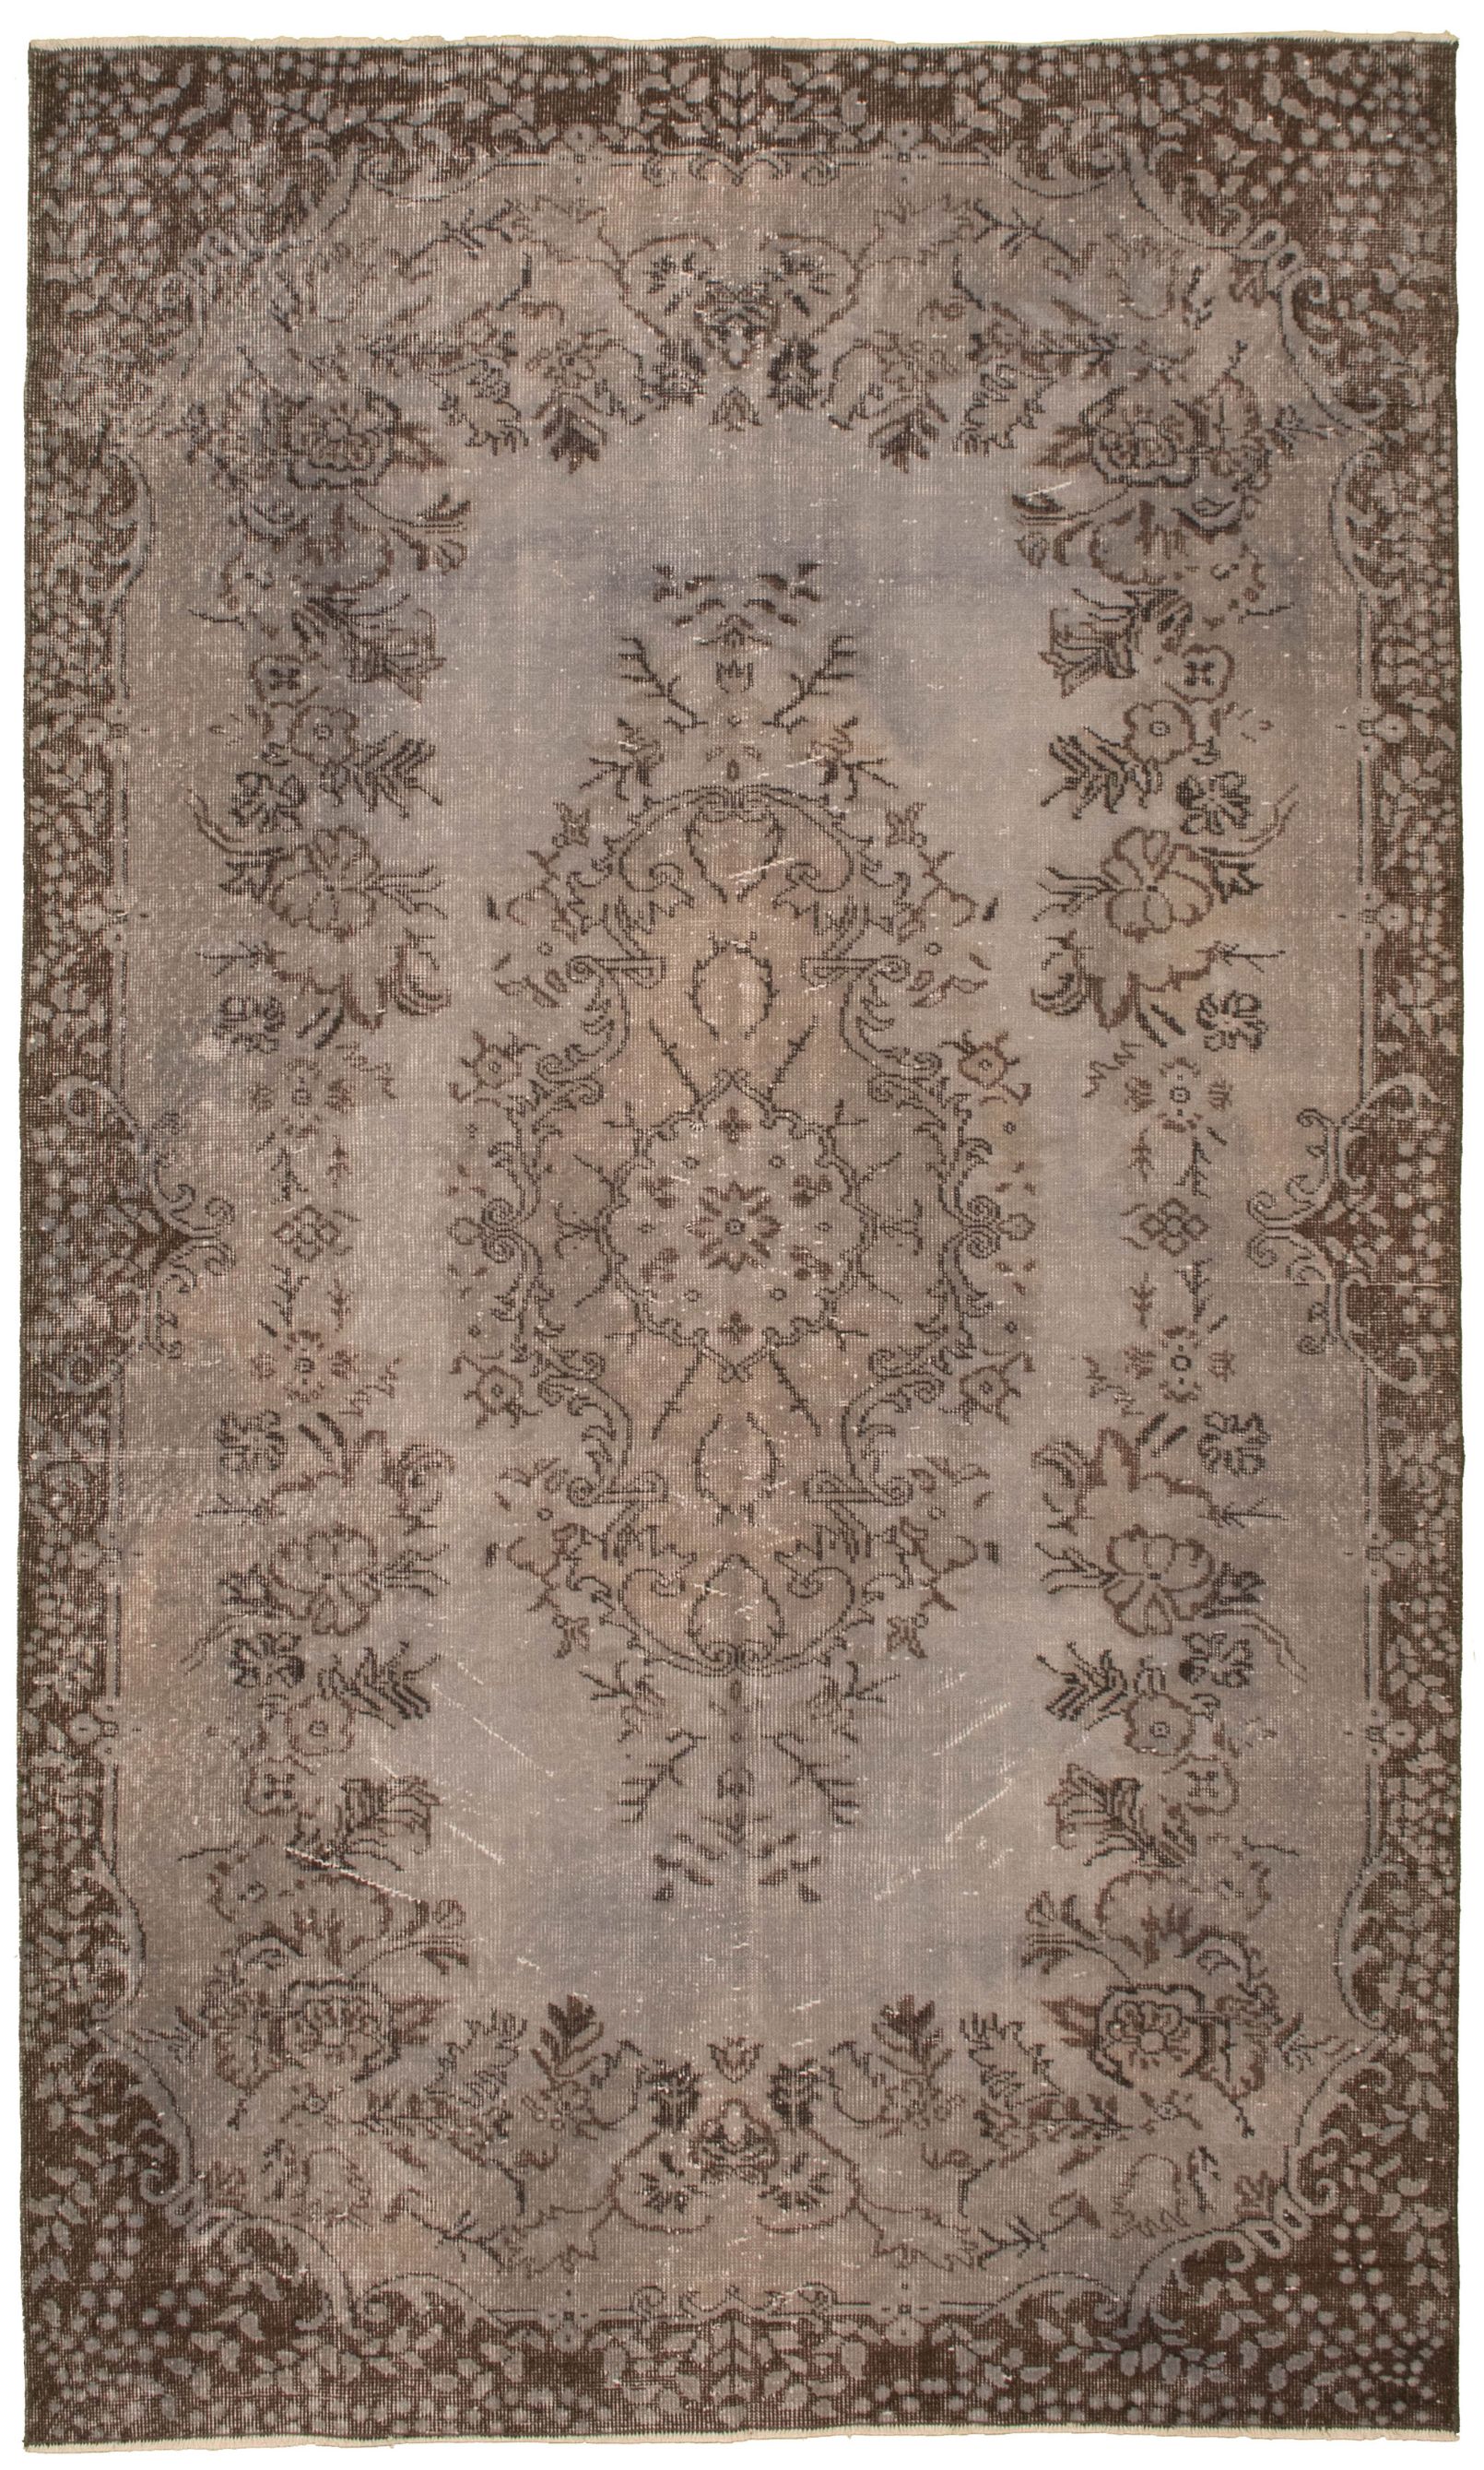 Hand-knotted Color Transition Light Grey, Light Khaki Wool Rug 5'7" x 9'5" Size: 5'7" x 9'5"  